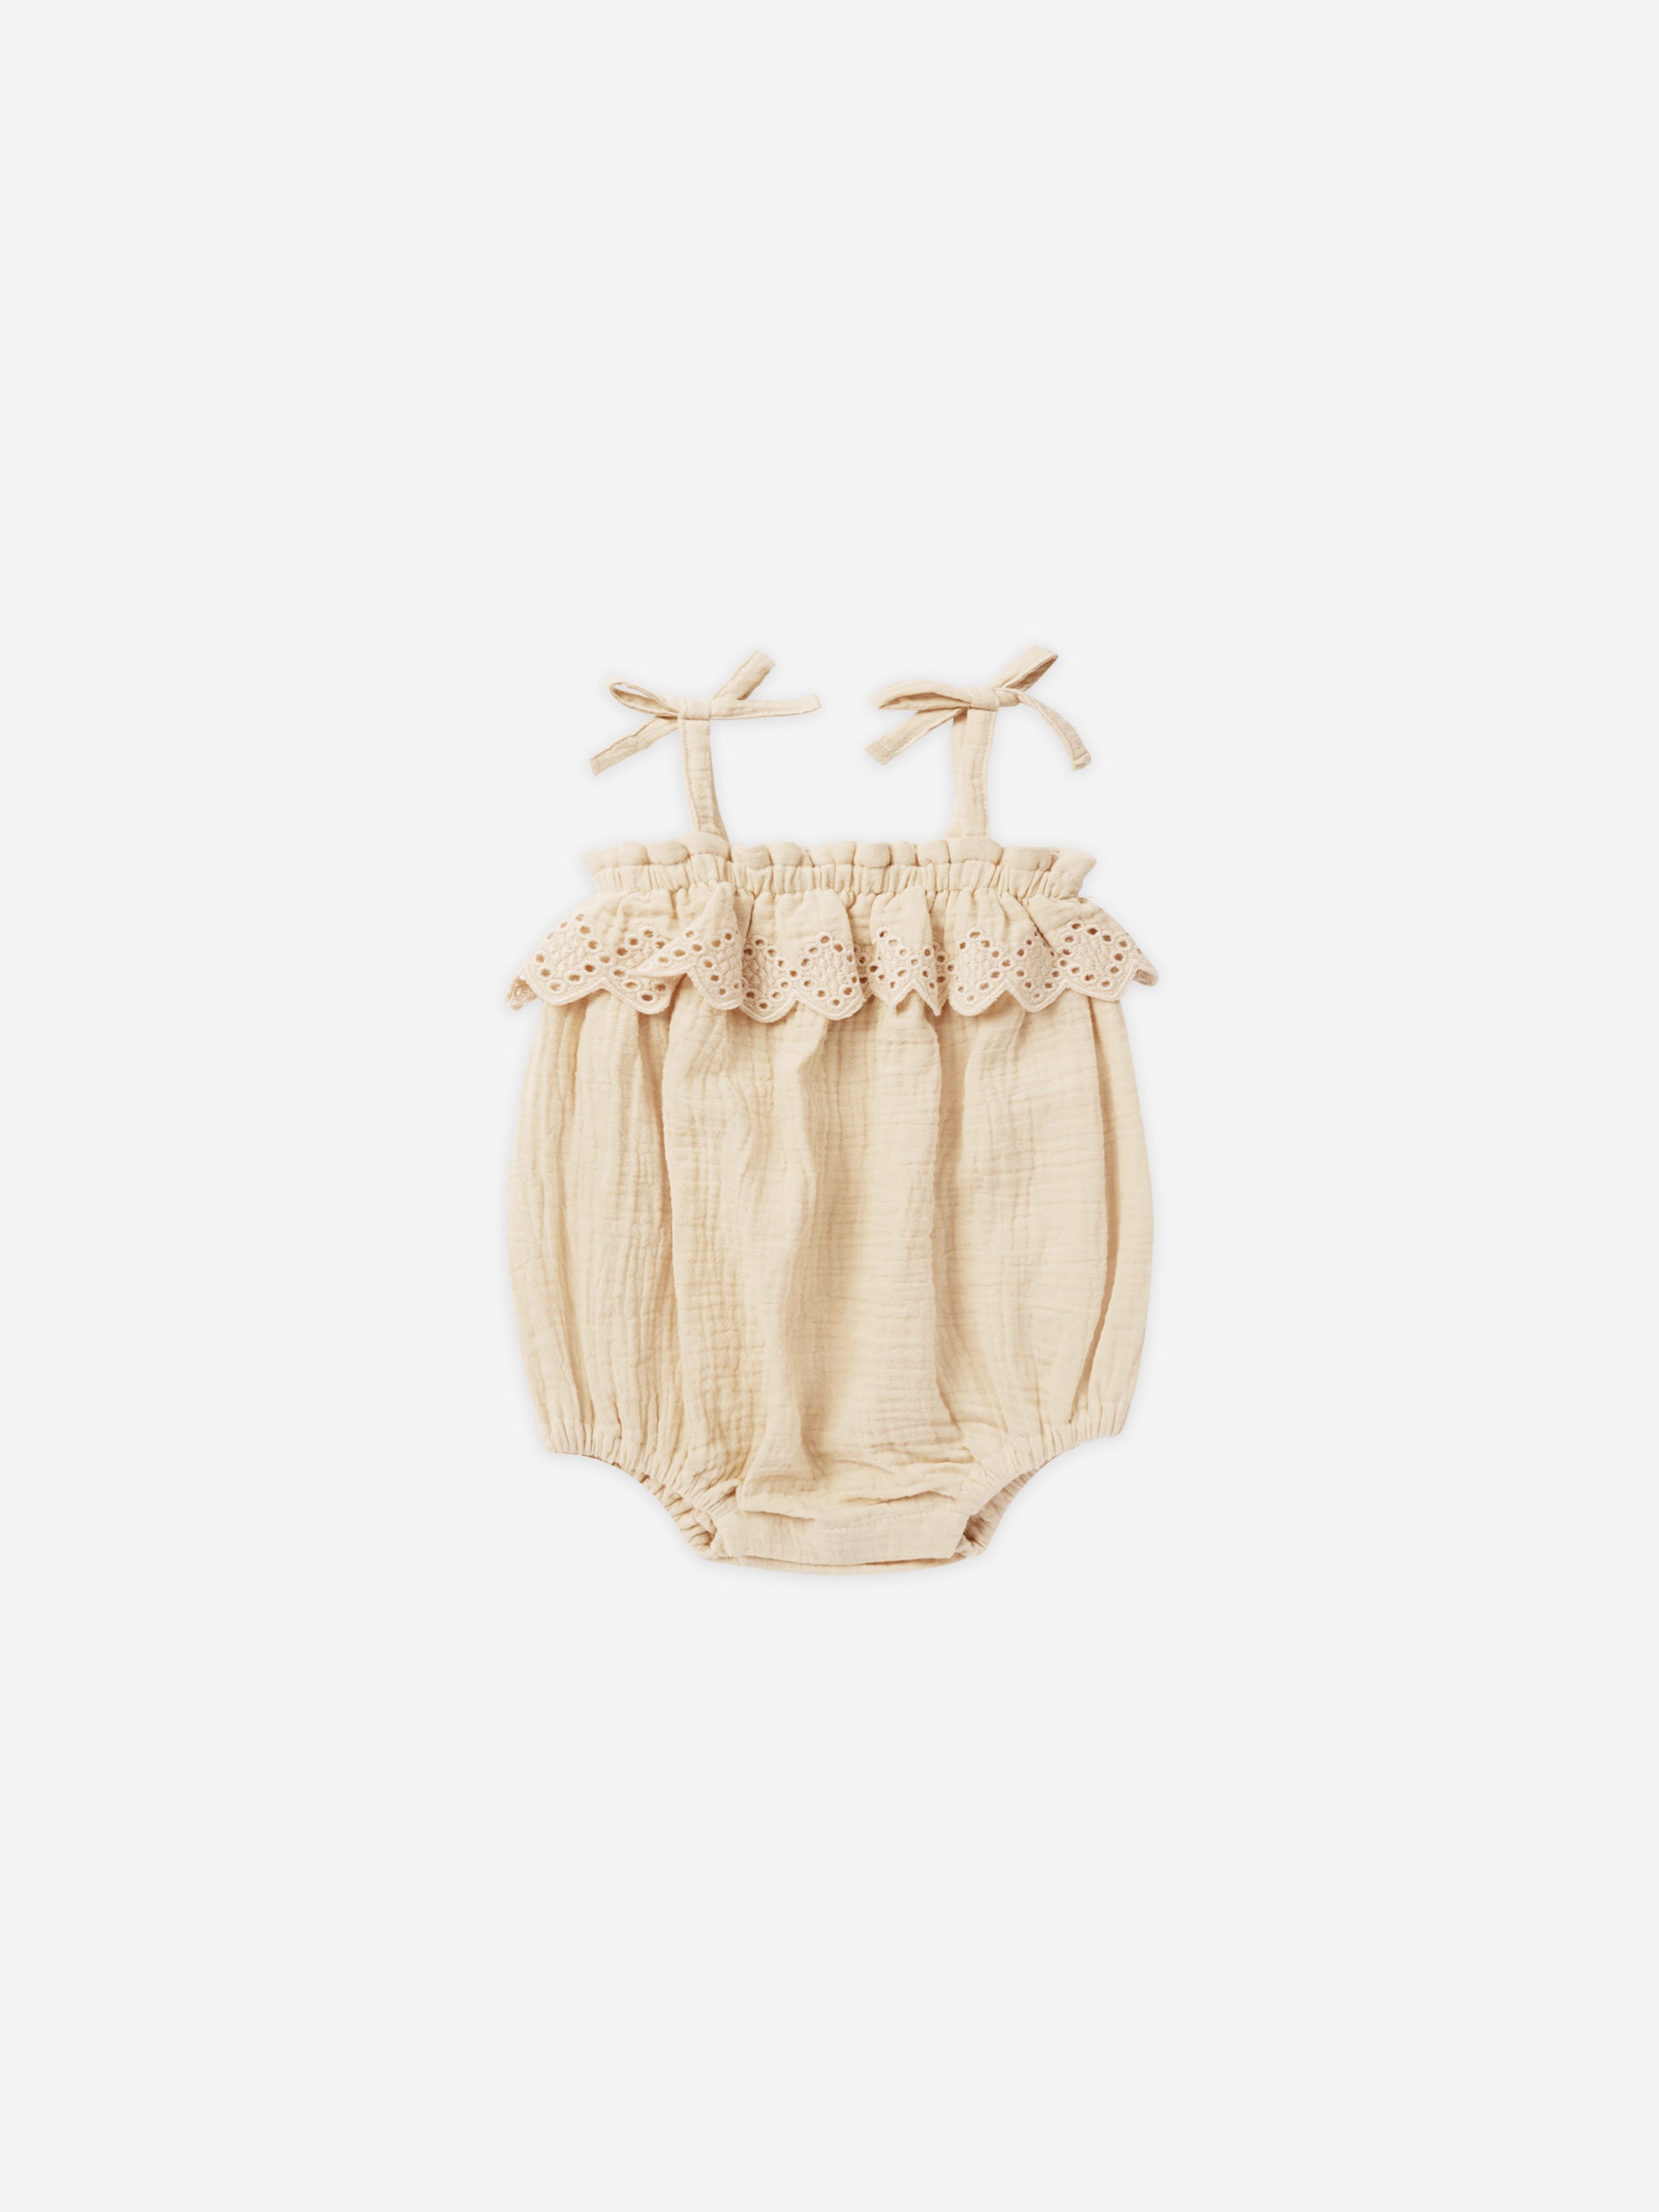 Ruffle Romper || Ecru - Rylee + Cru | Kids Clothes | Trendy Baby Clothes | Modern Infant Outfits |